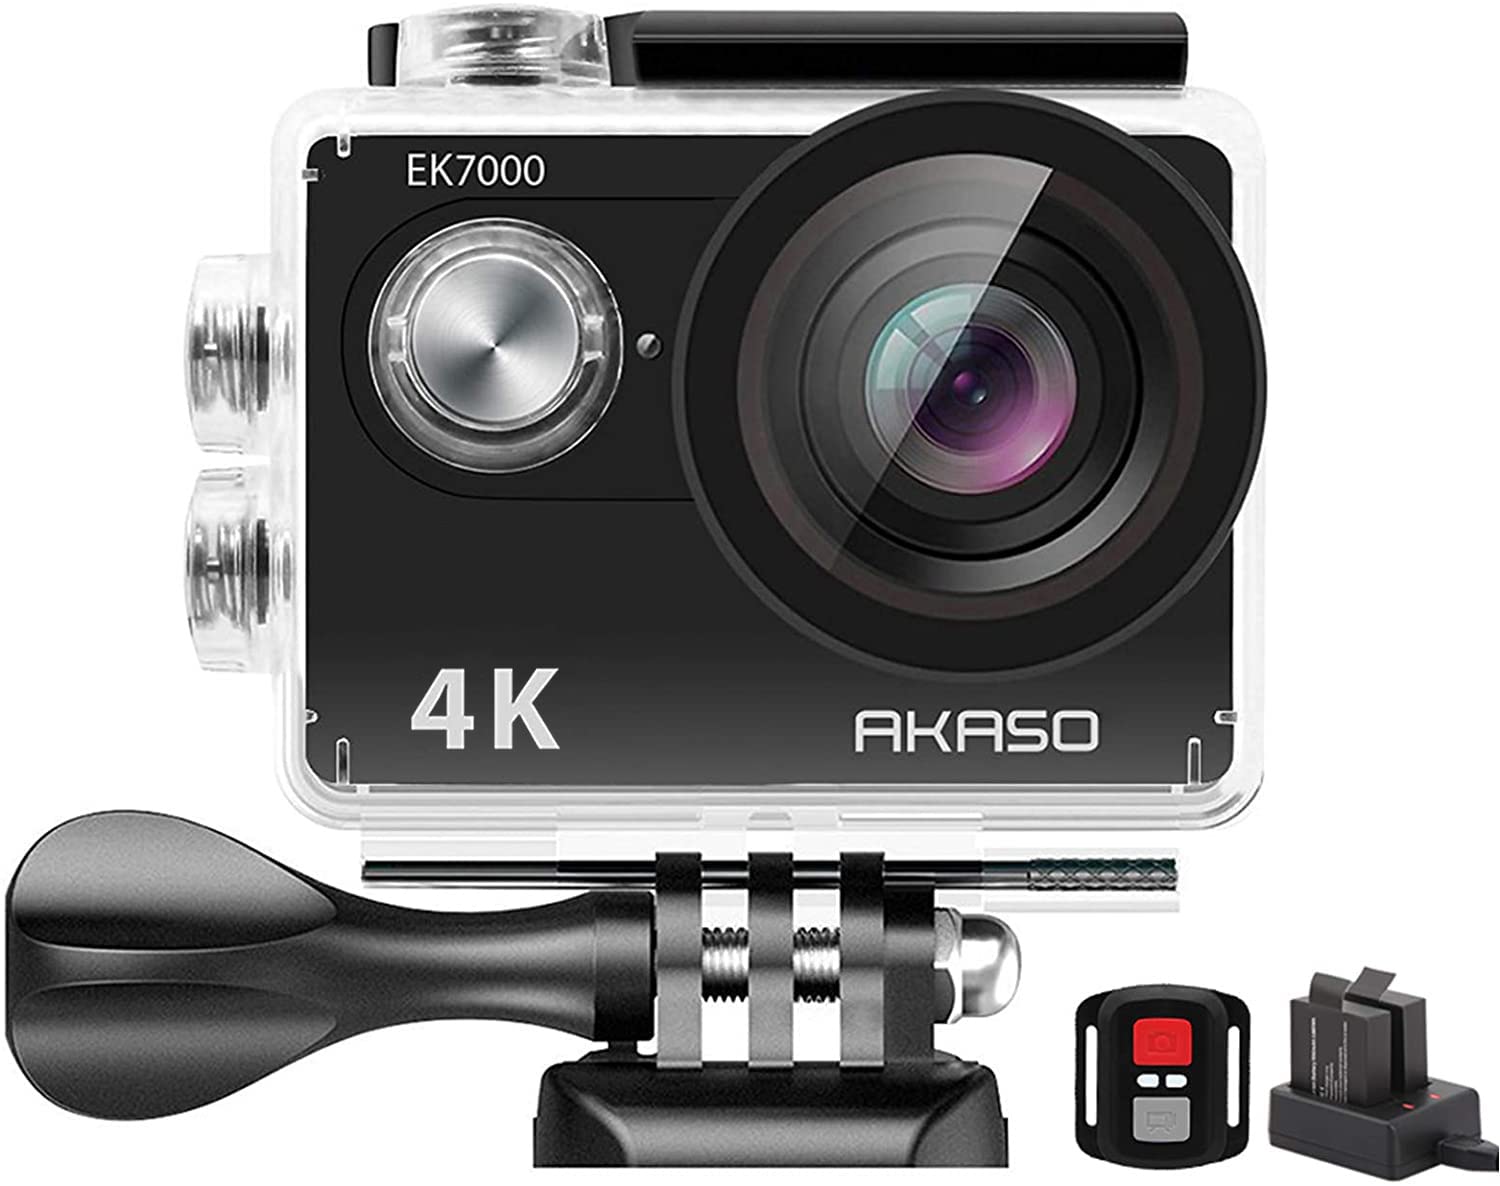 AKASO EK7000 4K Sport Action Camera Ultra HD Camcorder 12MP WiFi Waterproof Camera 170 Degree Wide View Angle 2 Inch LCD Screen W/2.4G Remote Control/2 Rechargeable Batteries/19 Accessories Kits (Black)